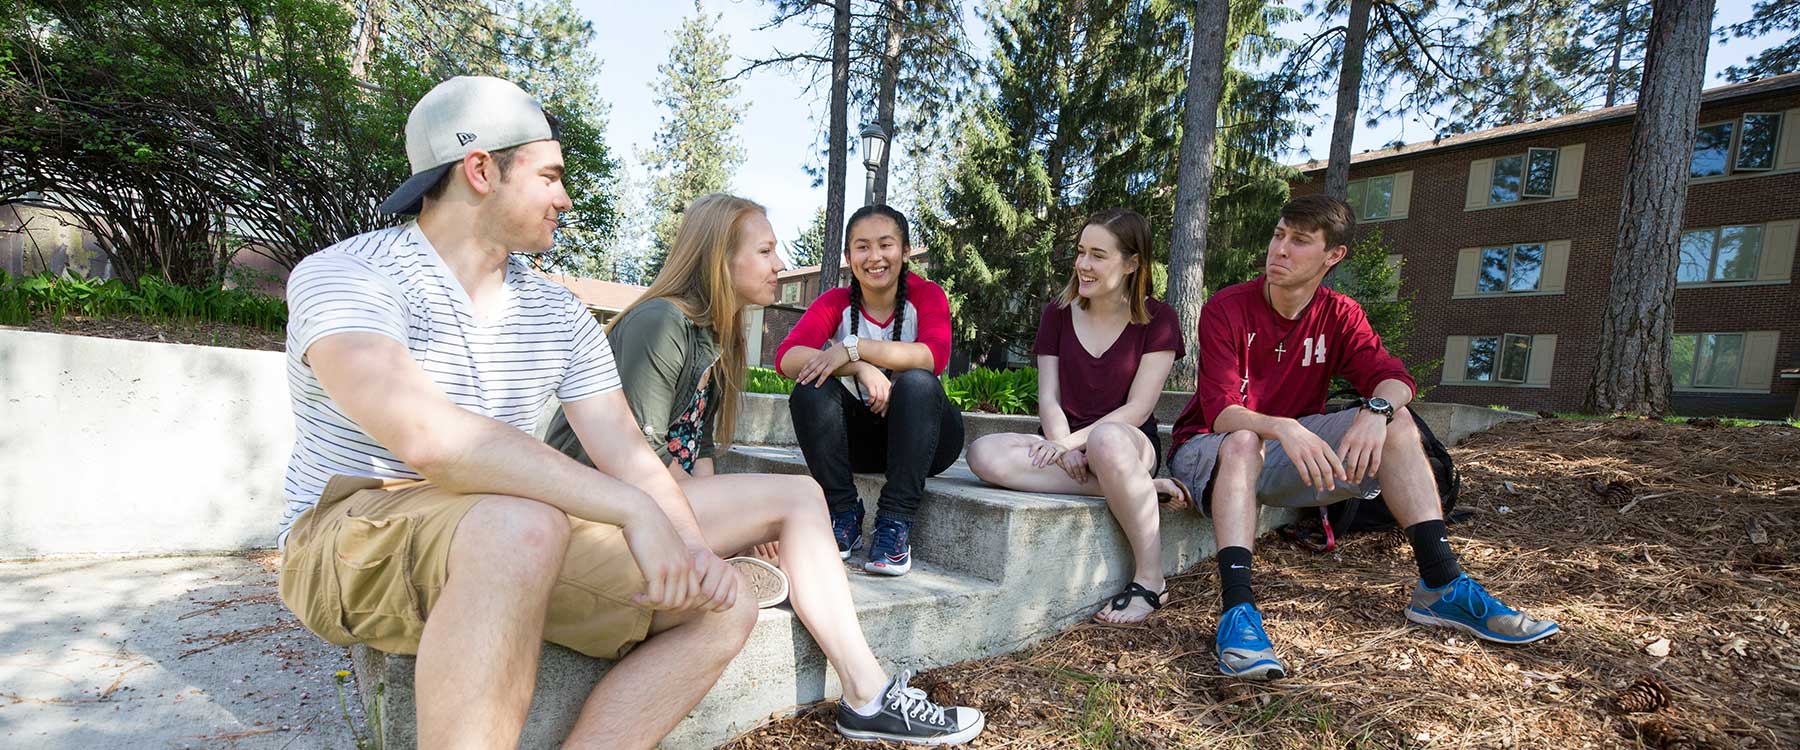 A group of students sit on concrete steps somewhere on campus. They smile and talk together.